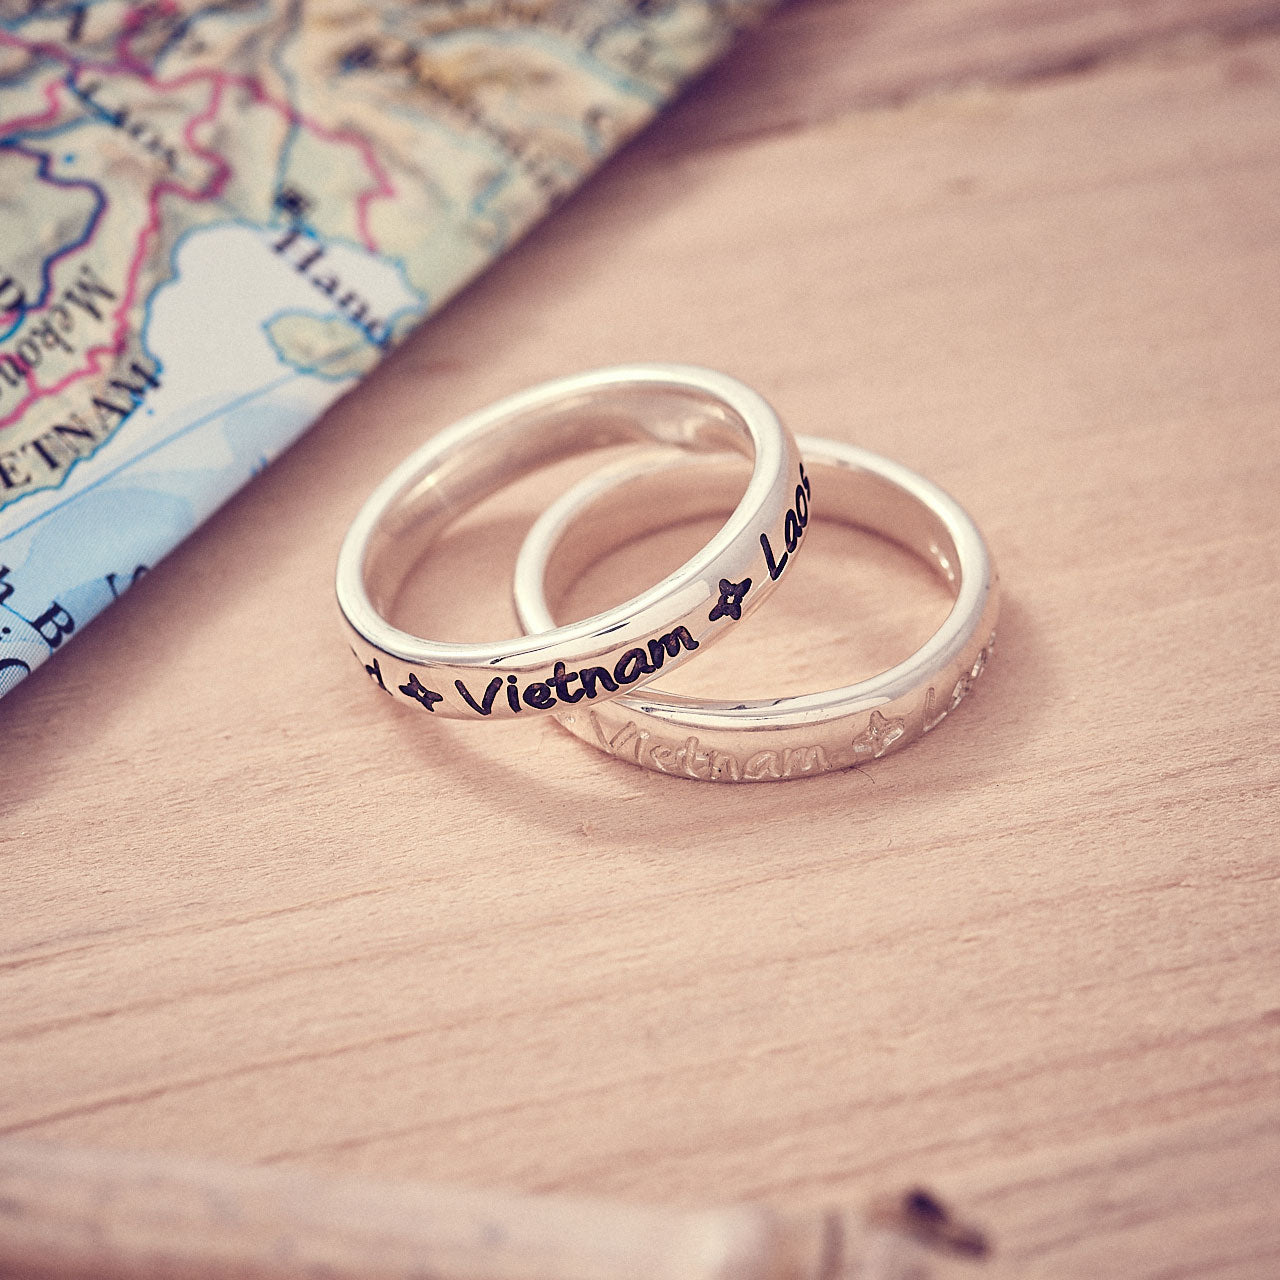 Round The World Personalised Travel Ring, unusual gift for a friend going travelling